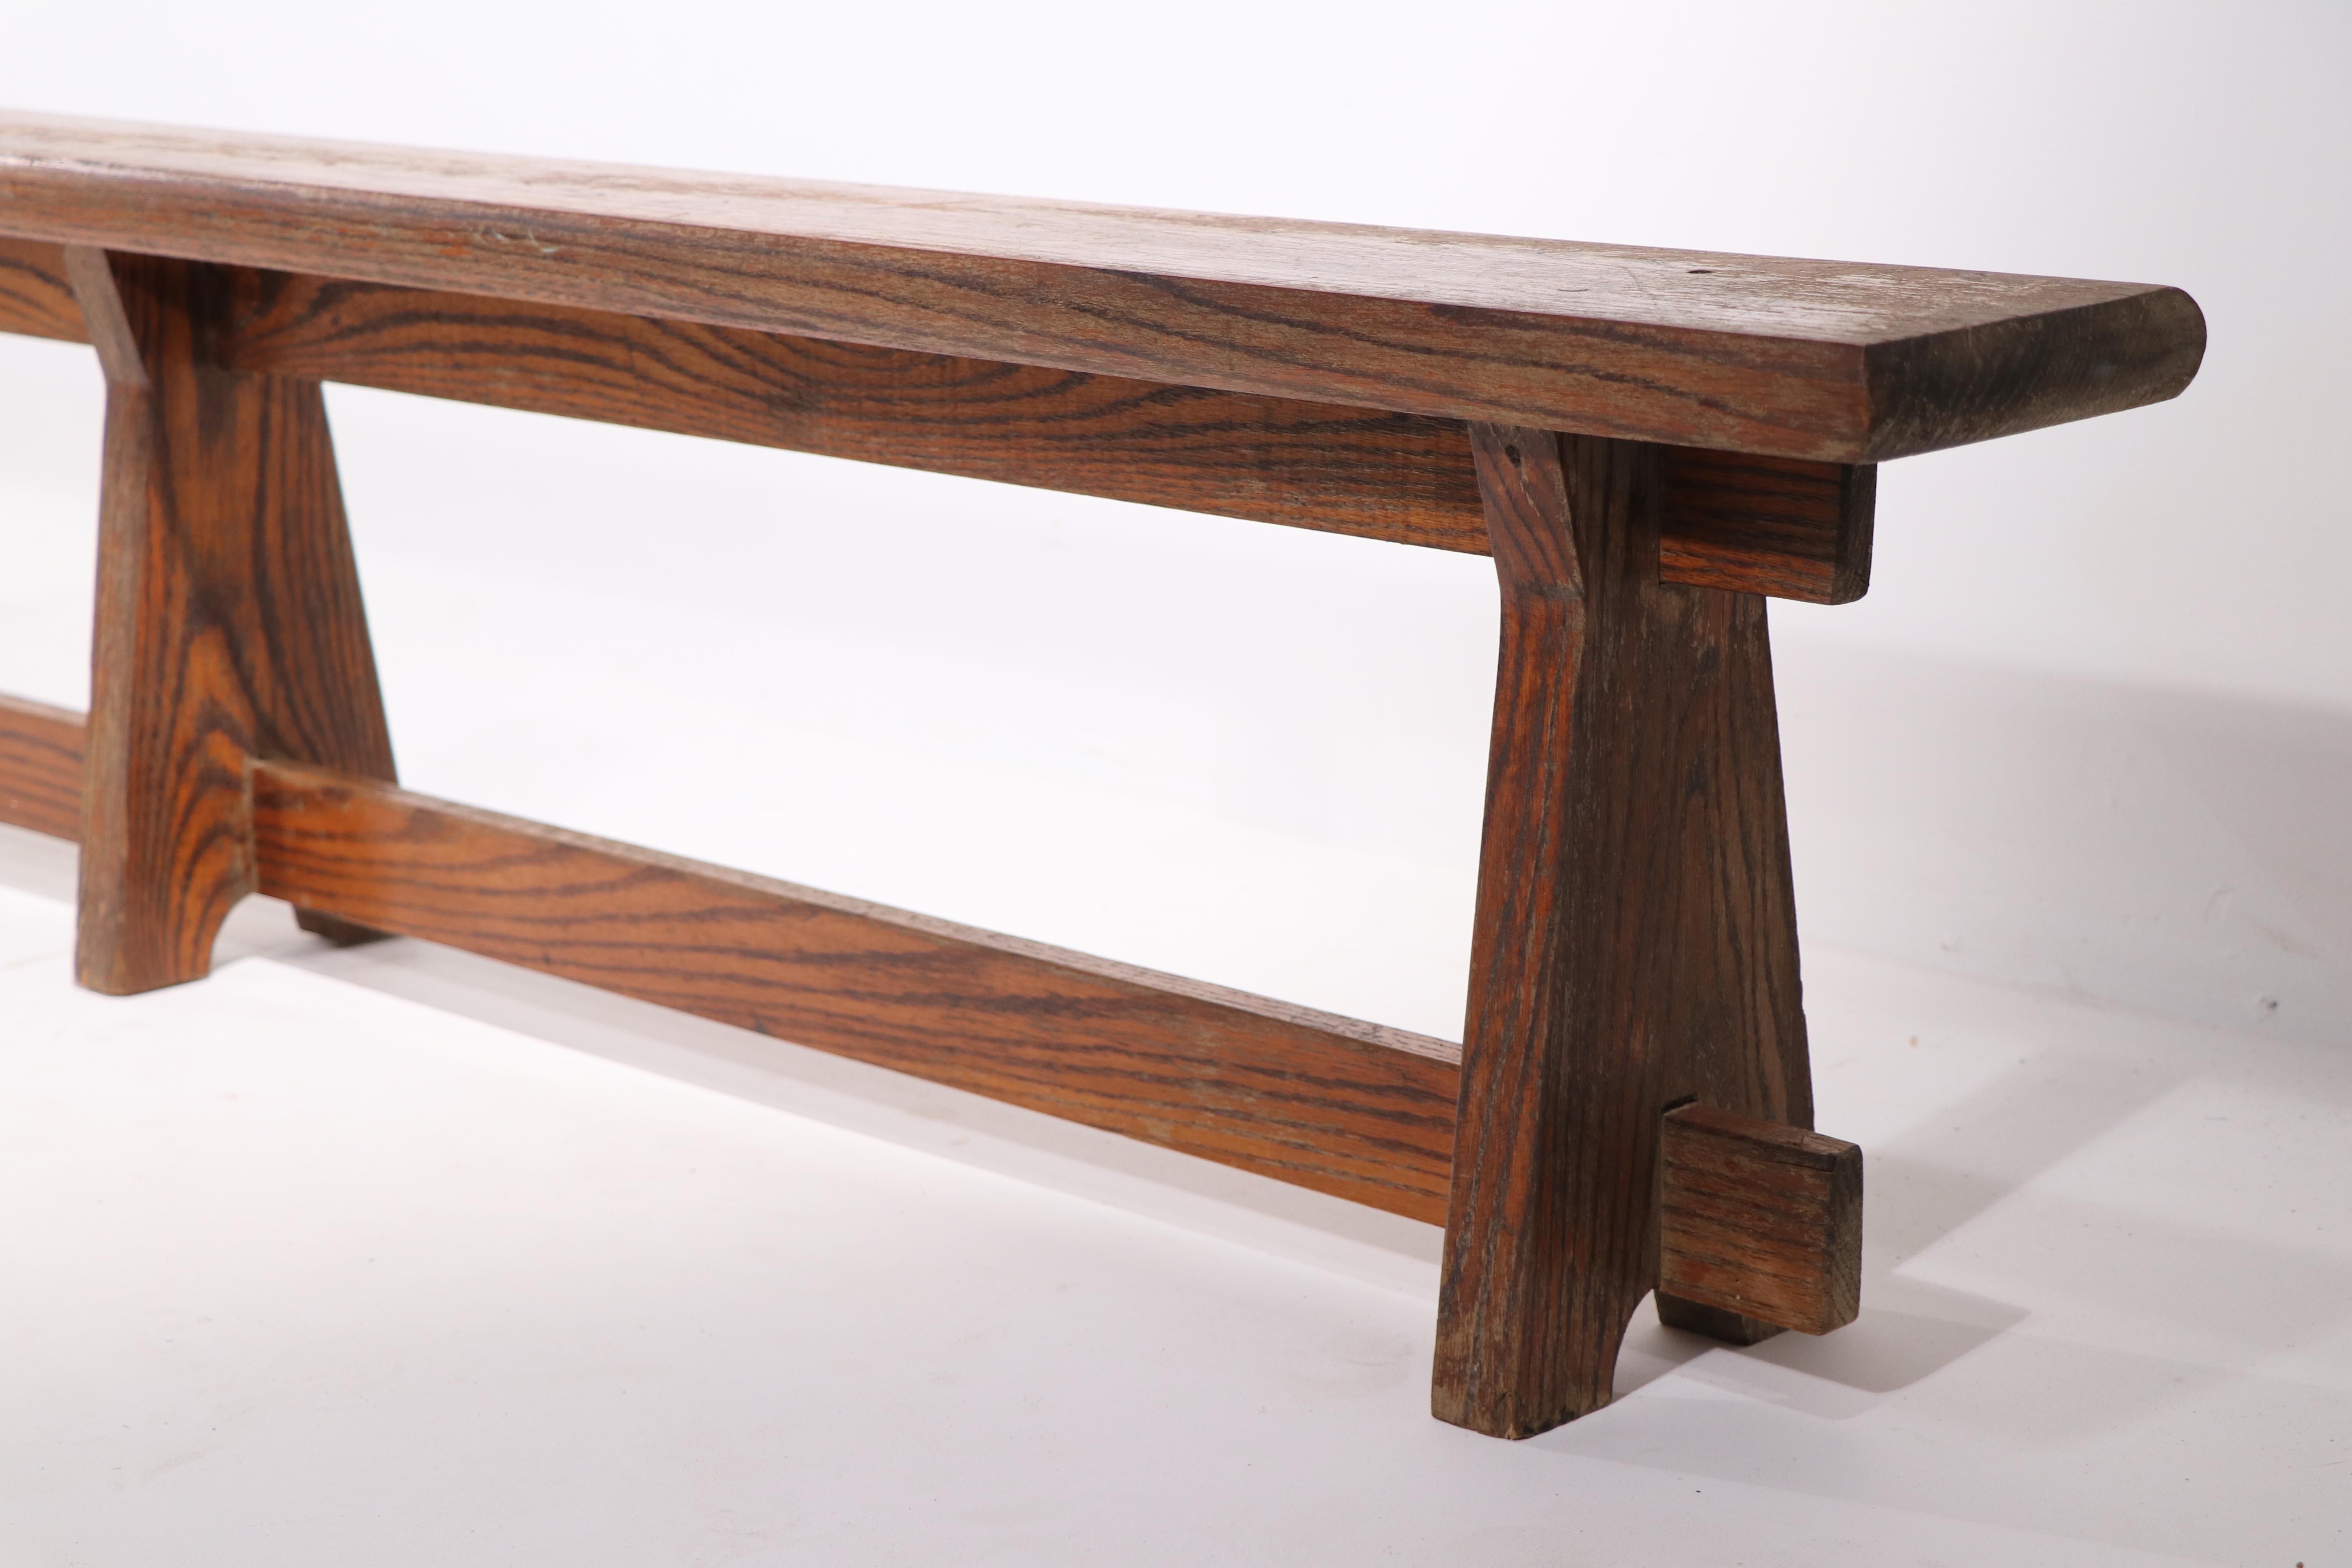 American Rustic Adirondack Arts and Crafts Style Benches